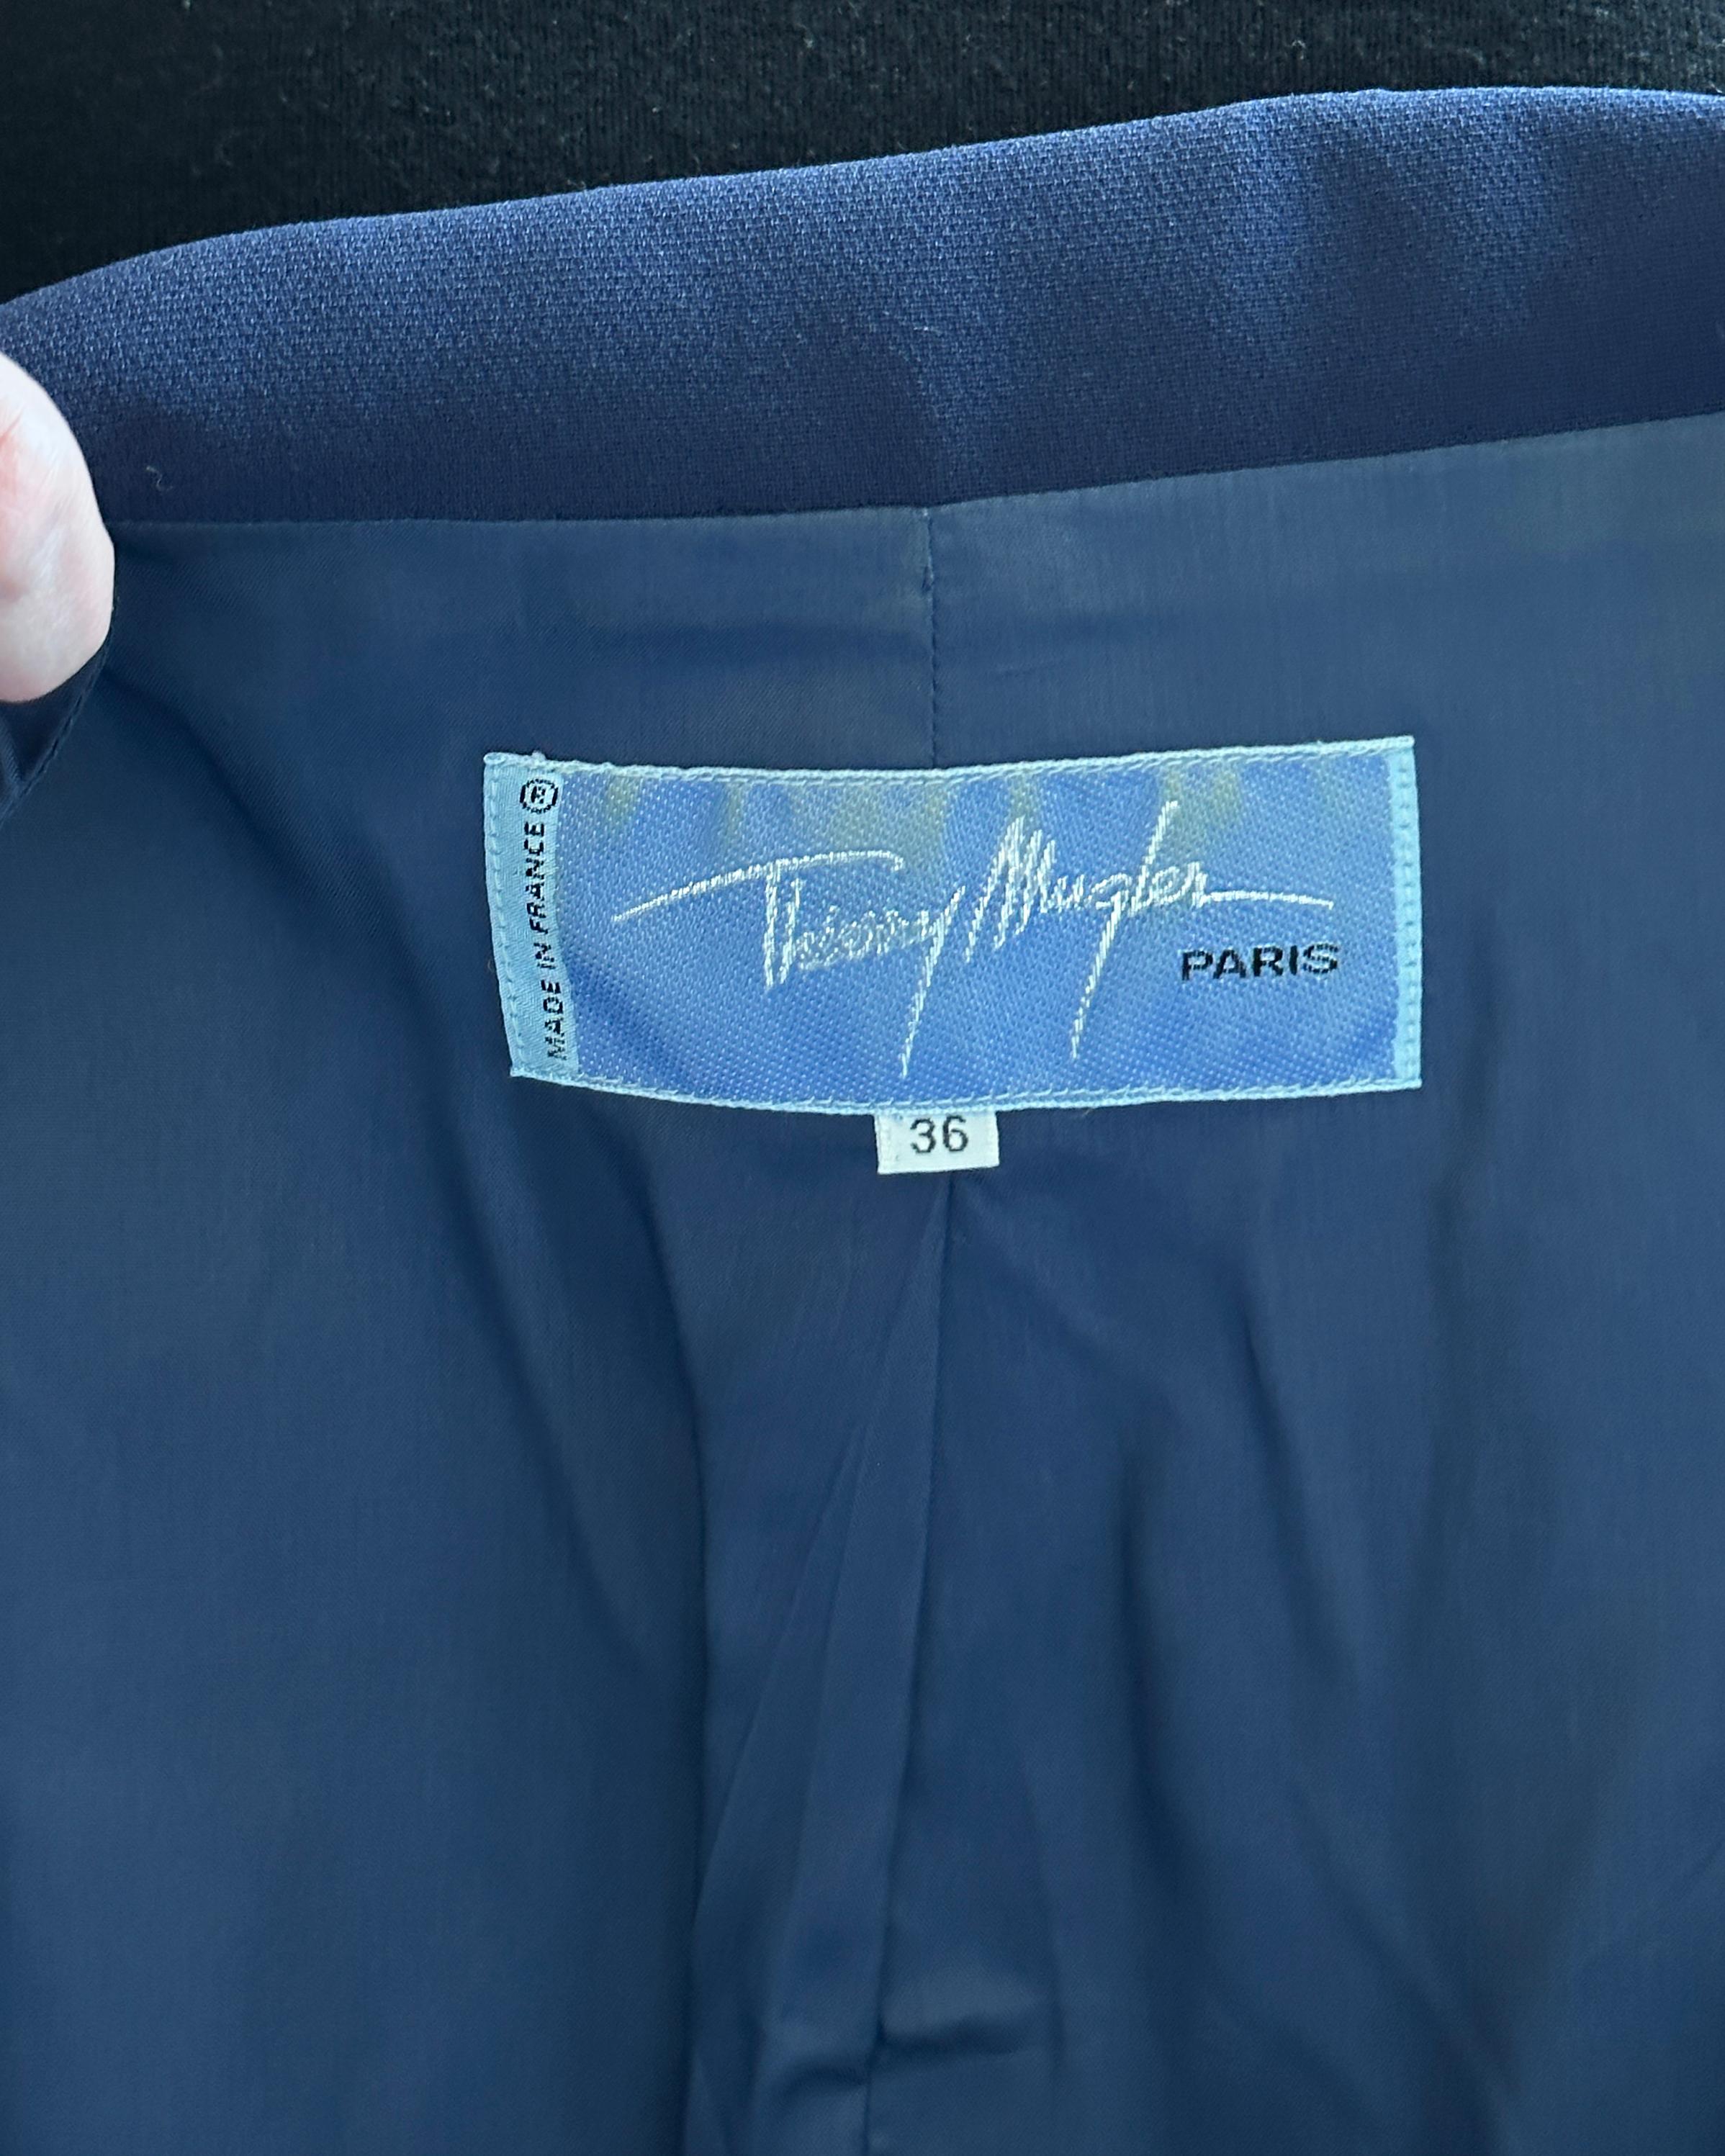 Vintage Thierry Mugler Navy Blue Jacket circa 1989 For Sale 5